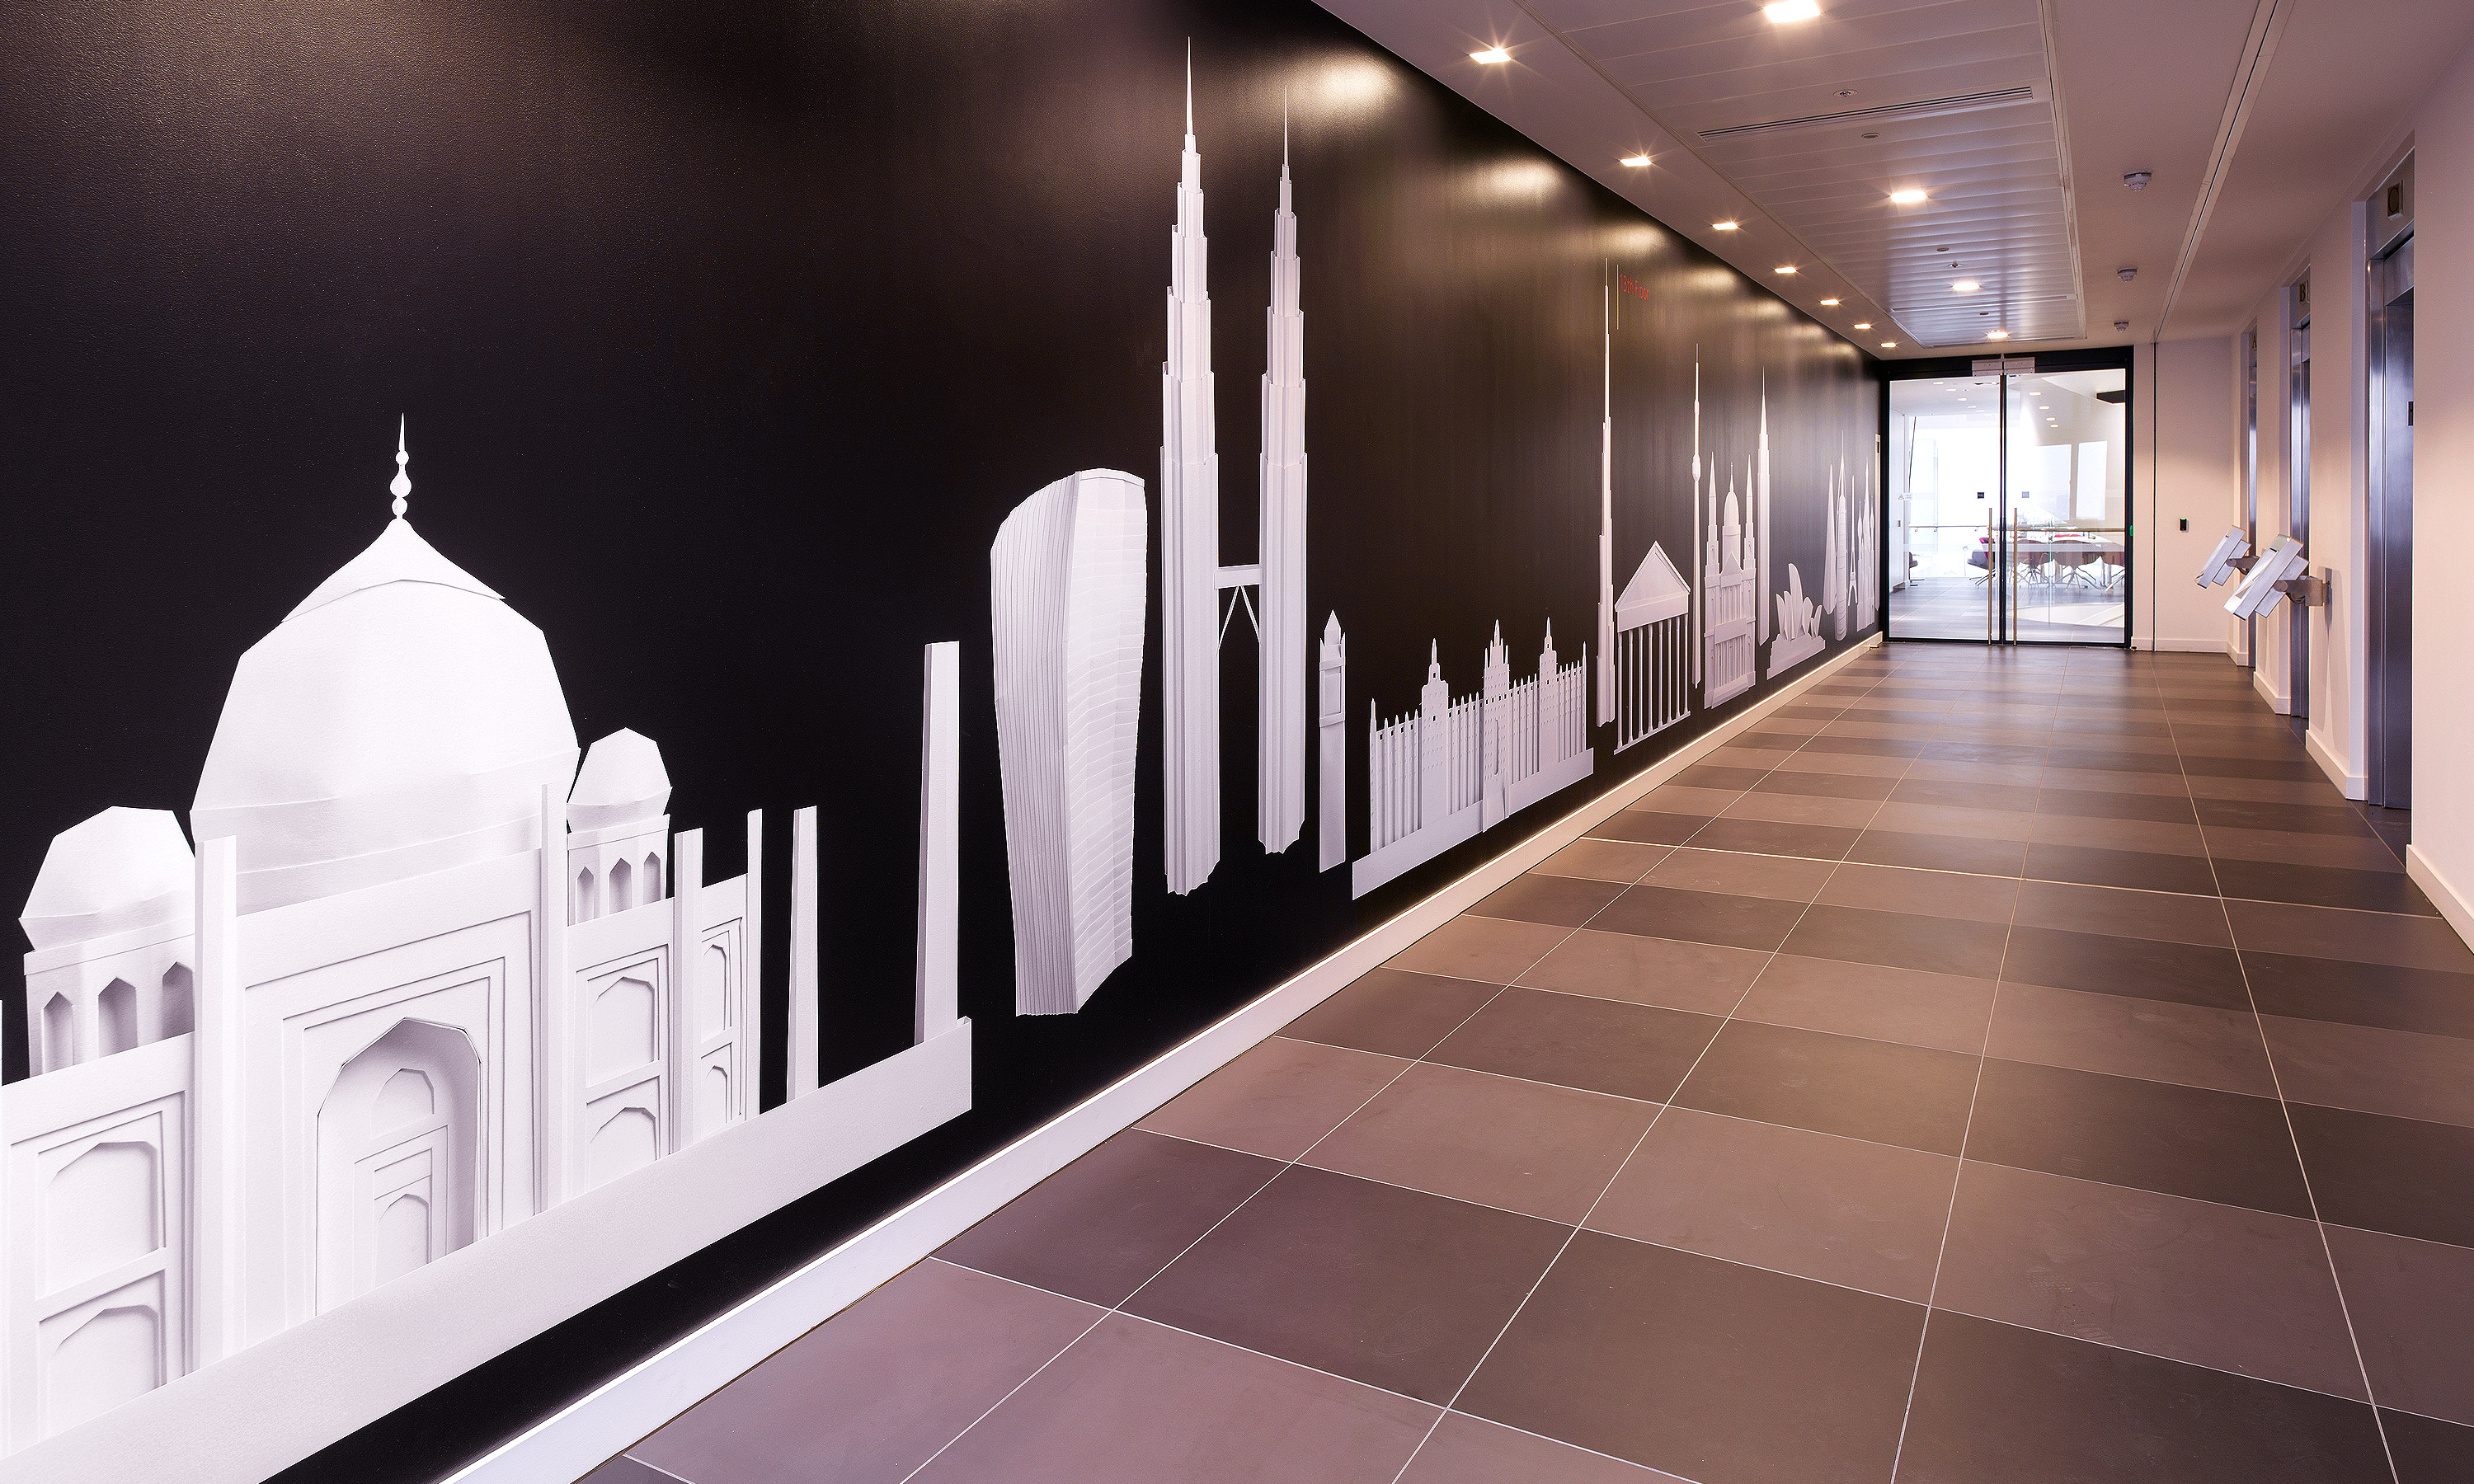 Branding by Neon - Nabarro Law Firm - Law sector branding - 125 London Wall Lift Lobby - origami architecture gallery graphics designed by Dana Robertson